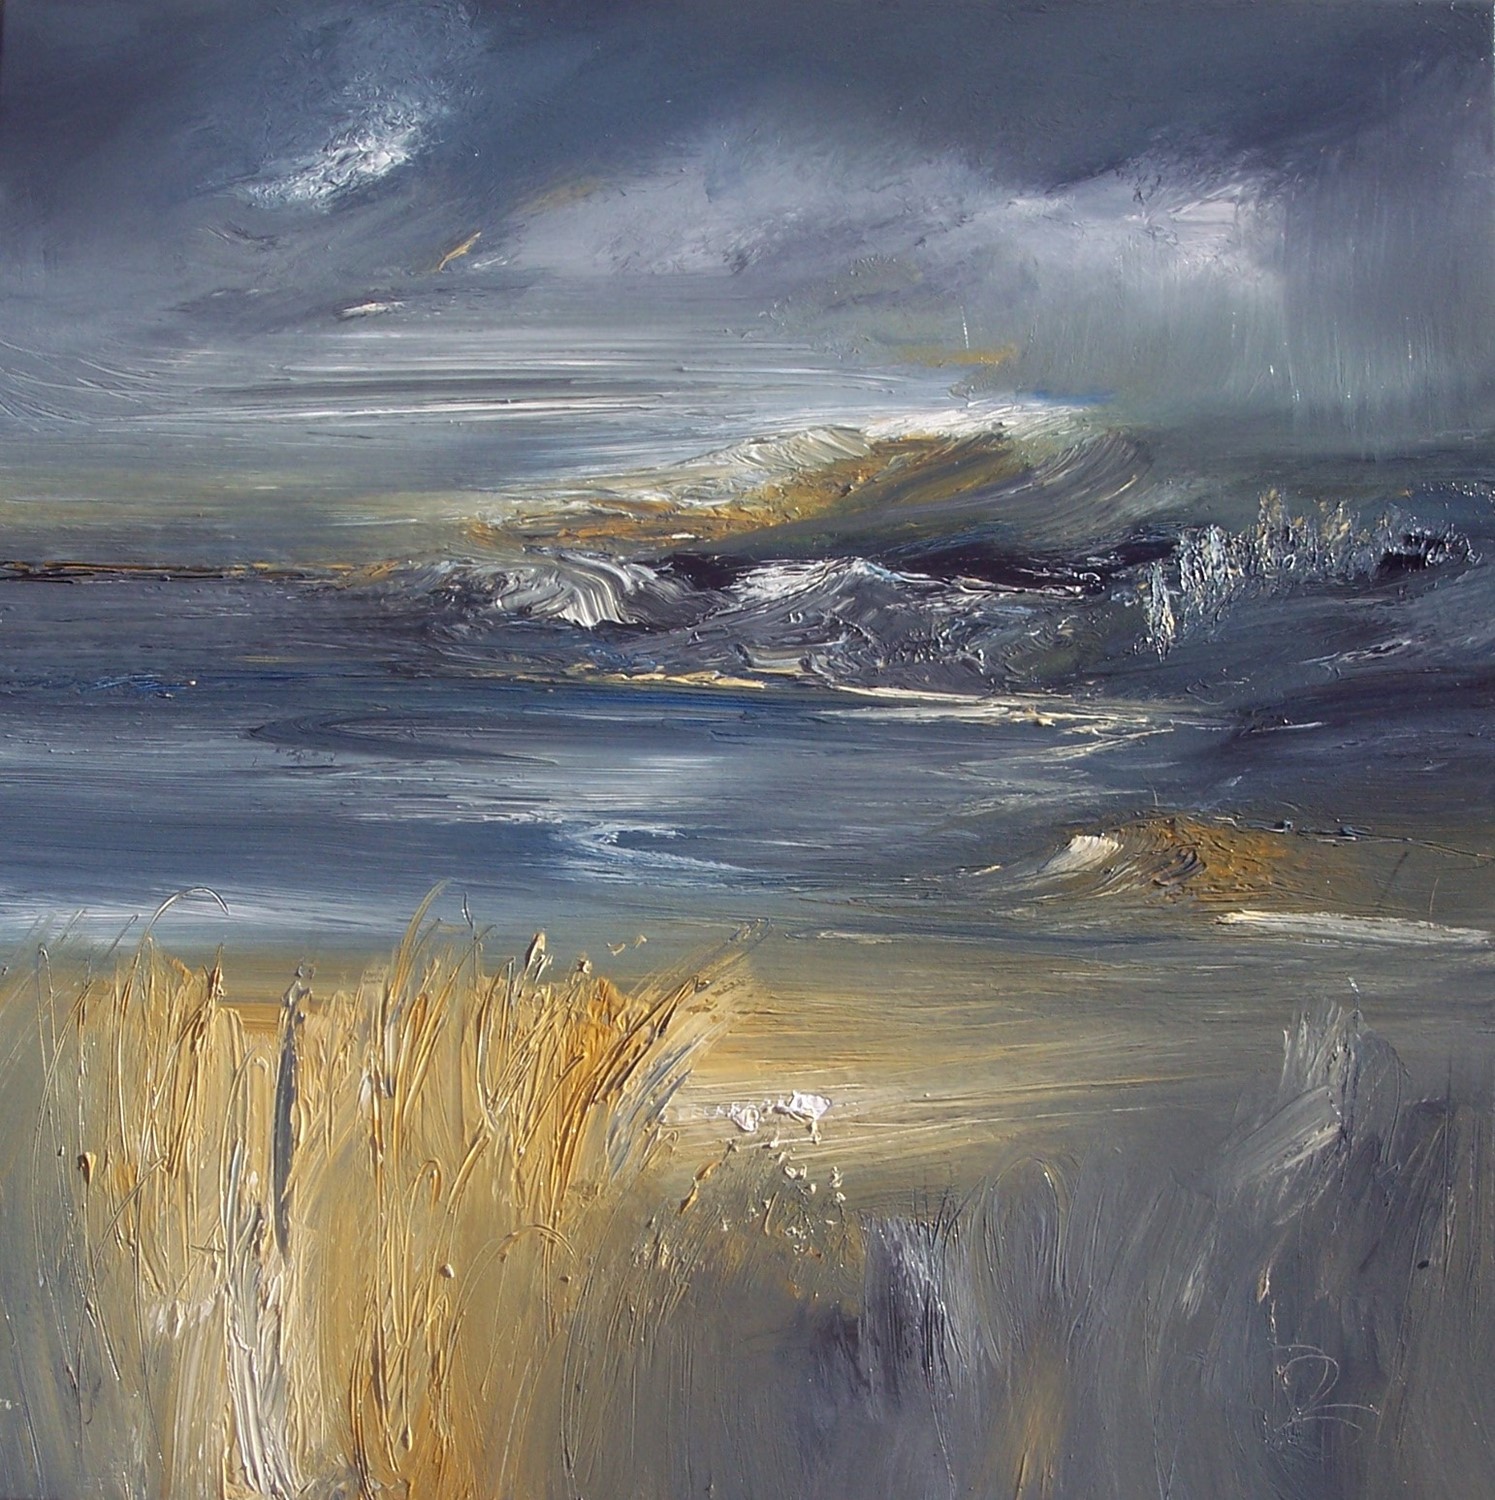 'A storm Looming Oil' by artist Rosanne Barr